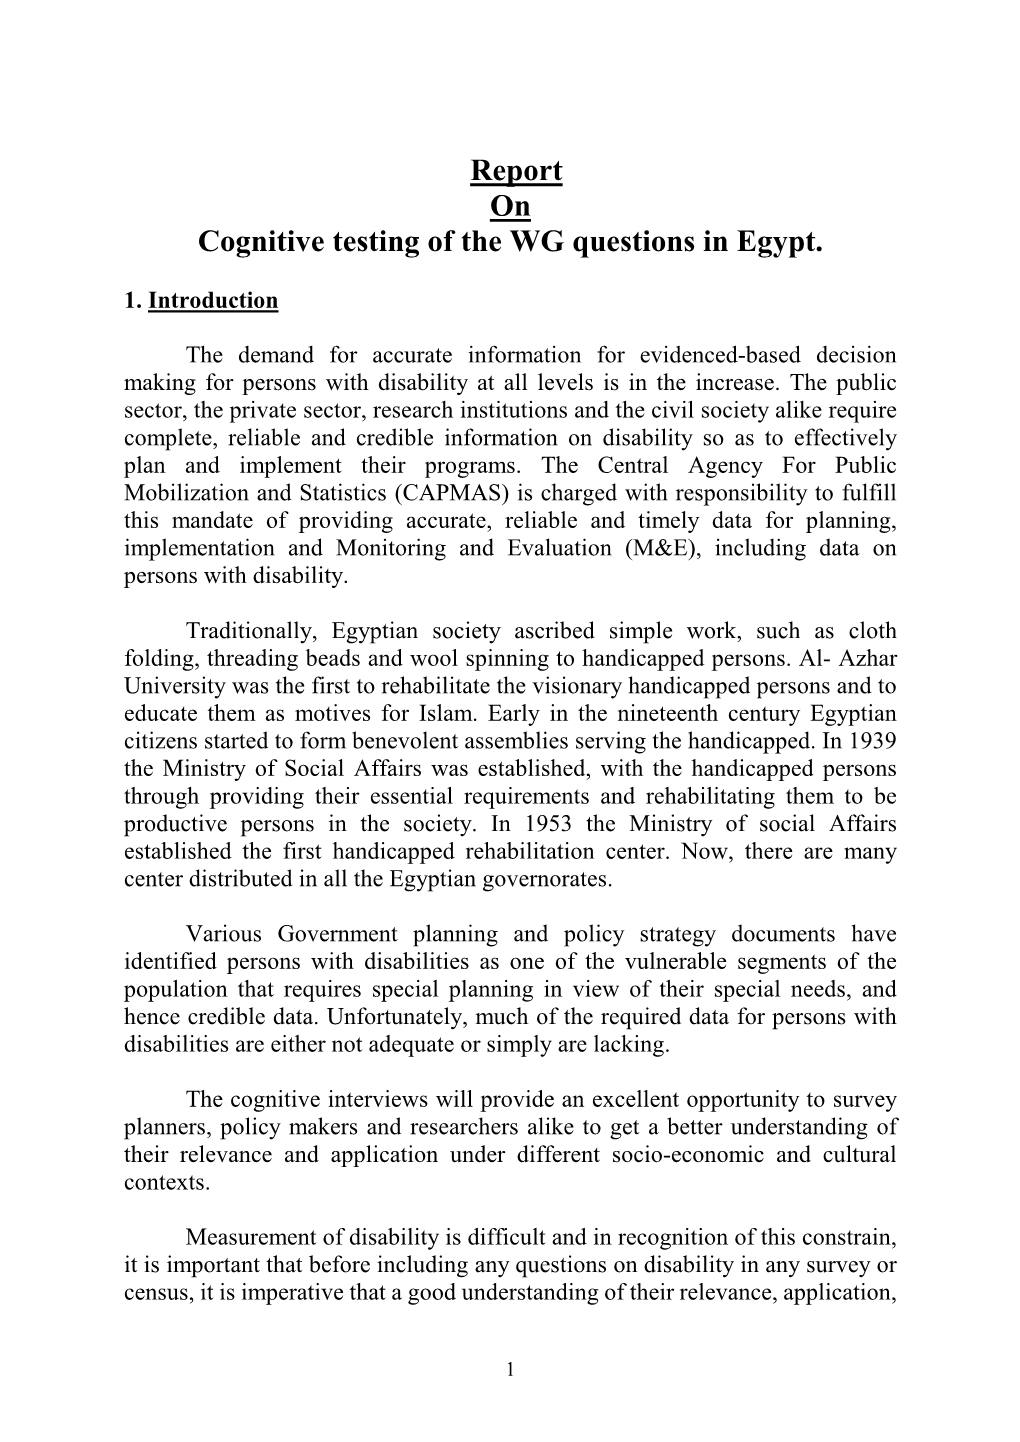 Report on Cognitive Testing of the WG Questions in Egypt